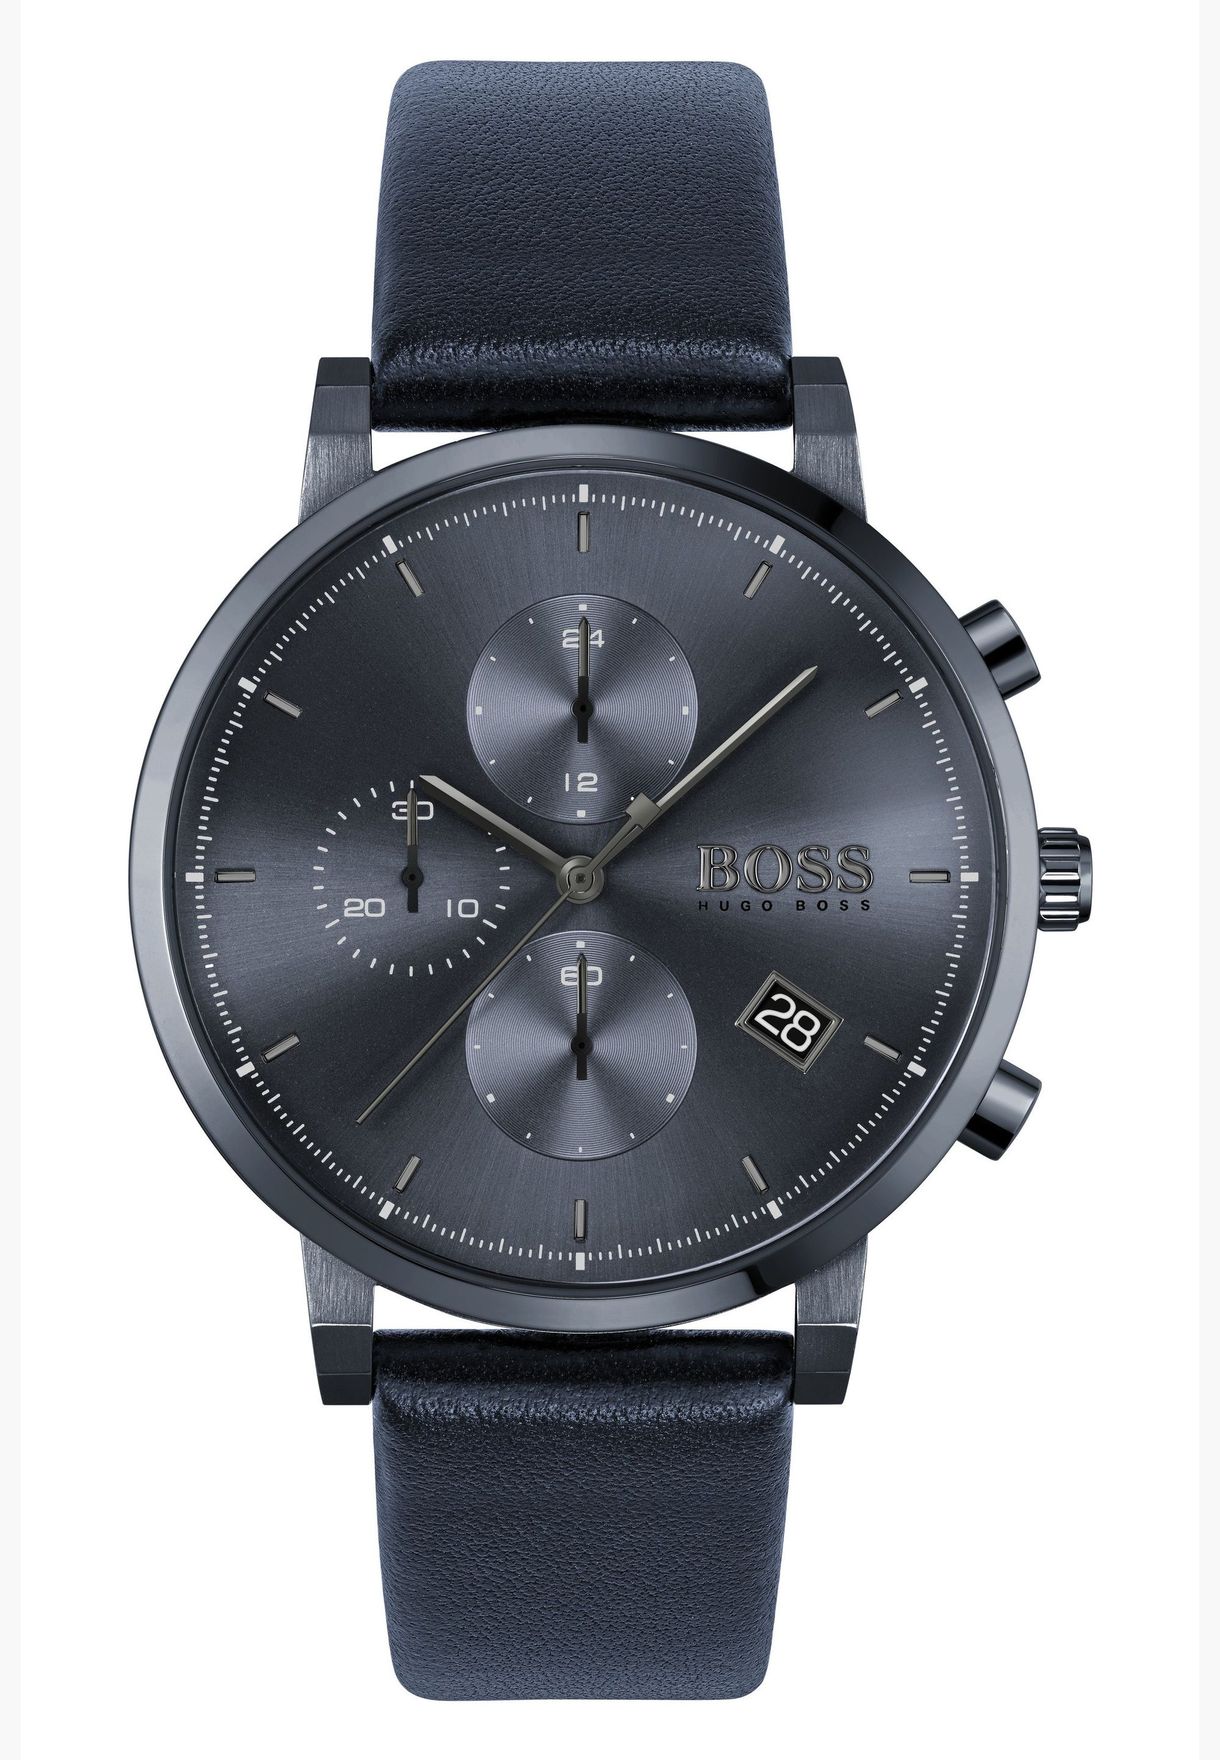 Hugo Boss INTEGRITY Leather Strap Watch for Men - 1513778